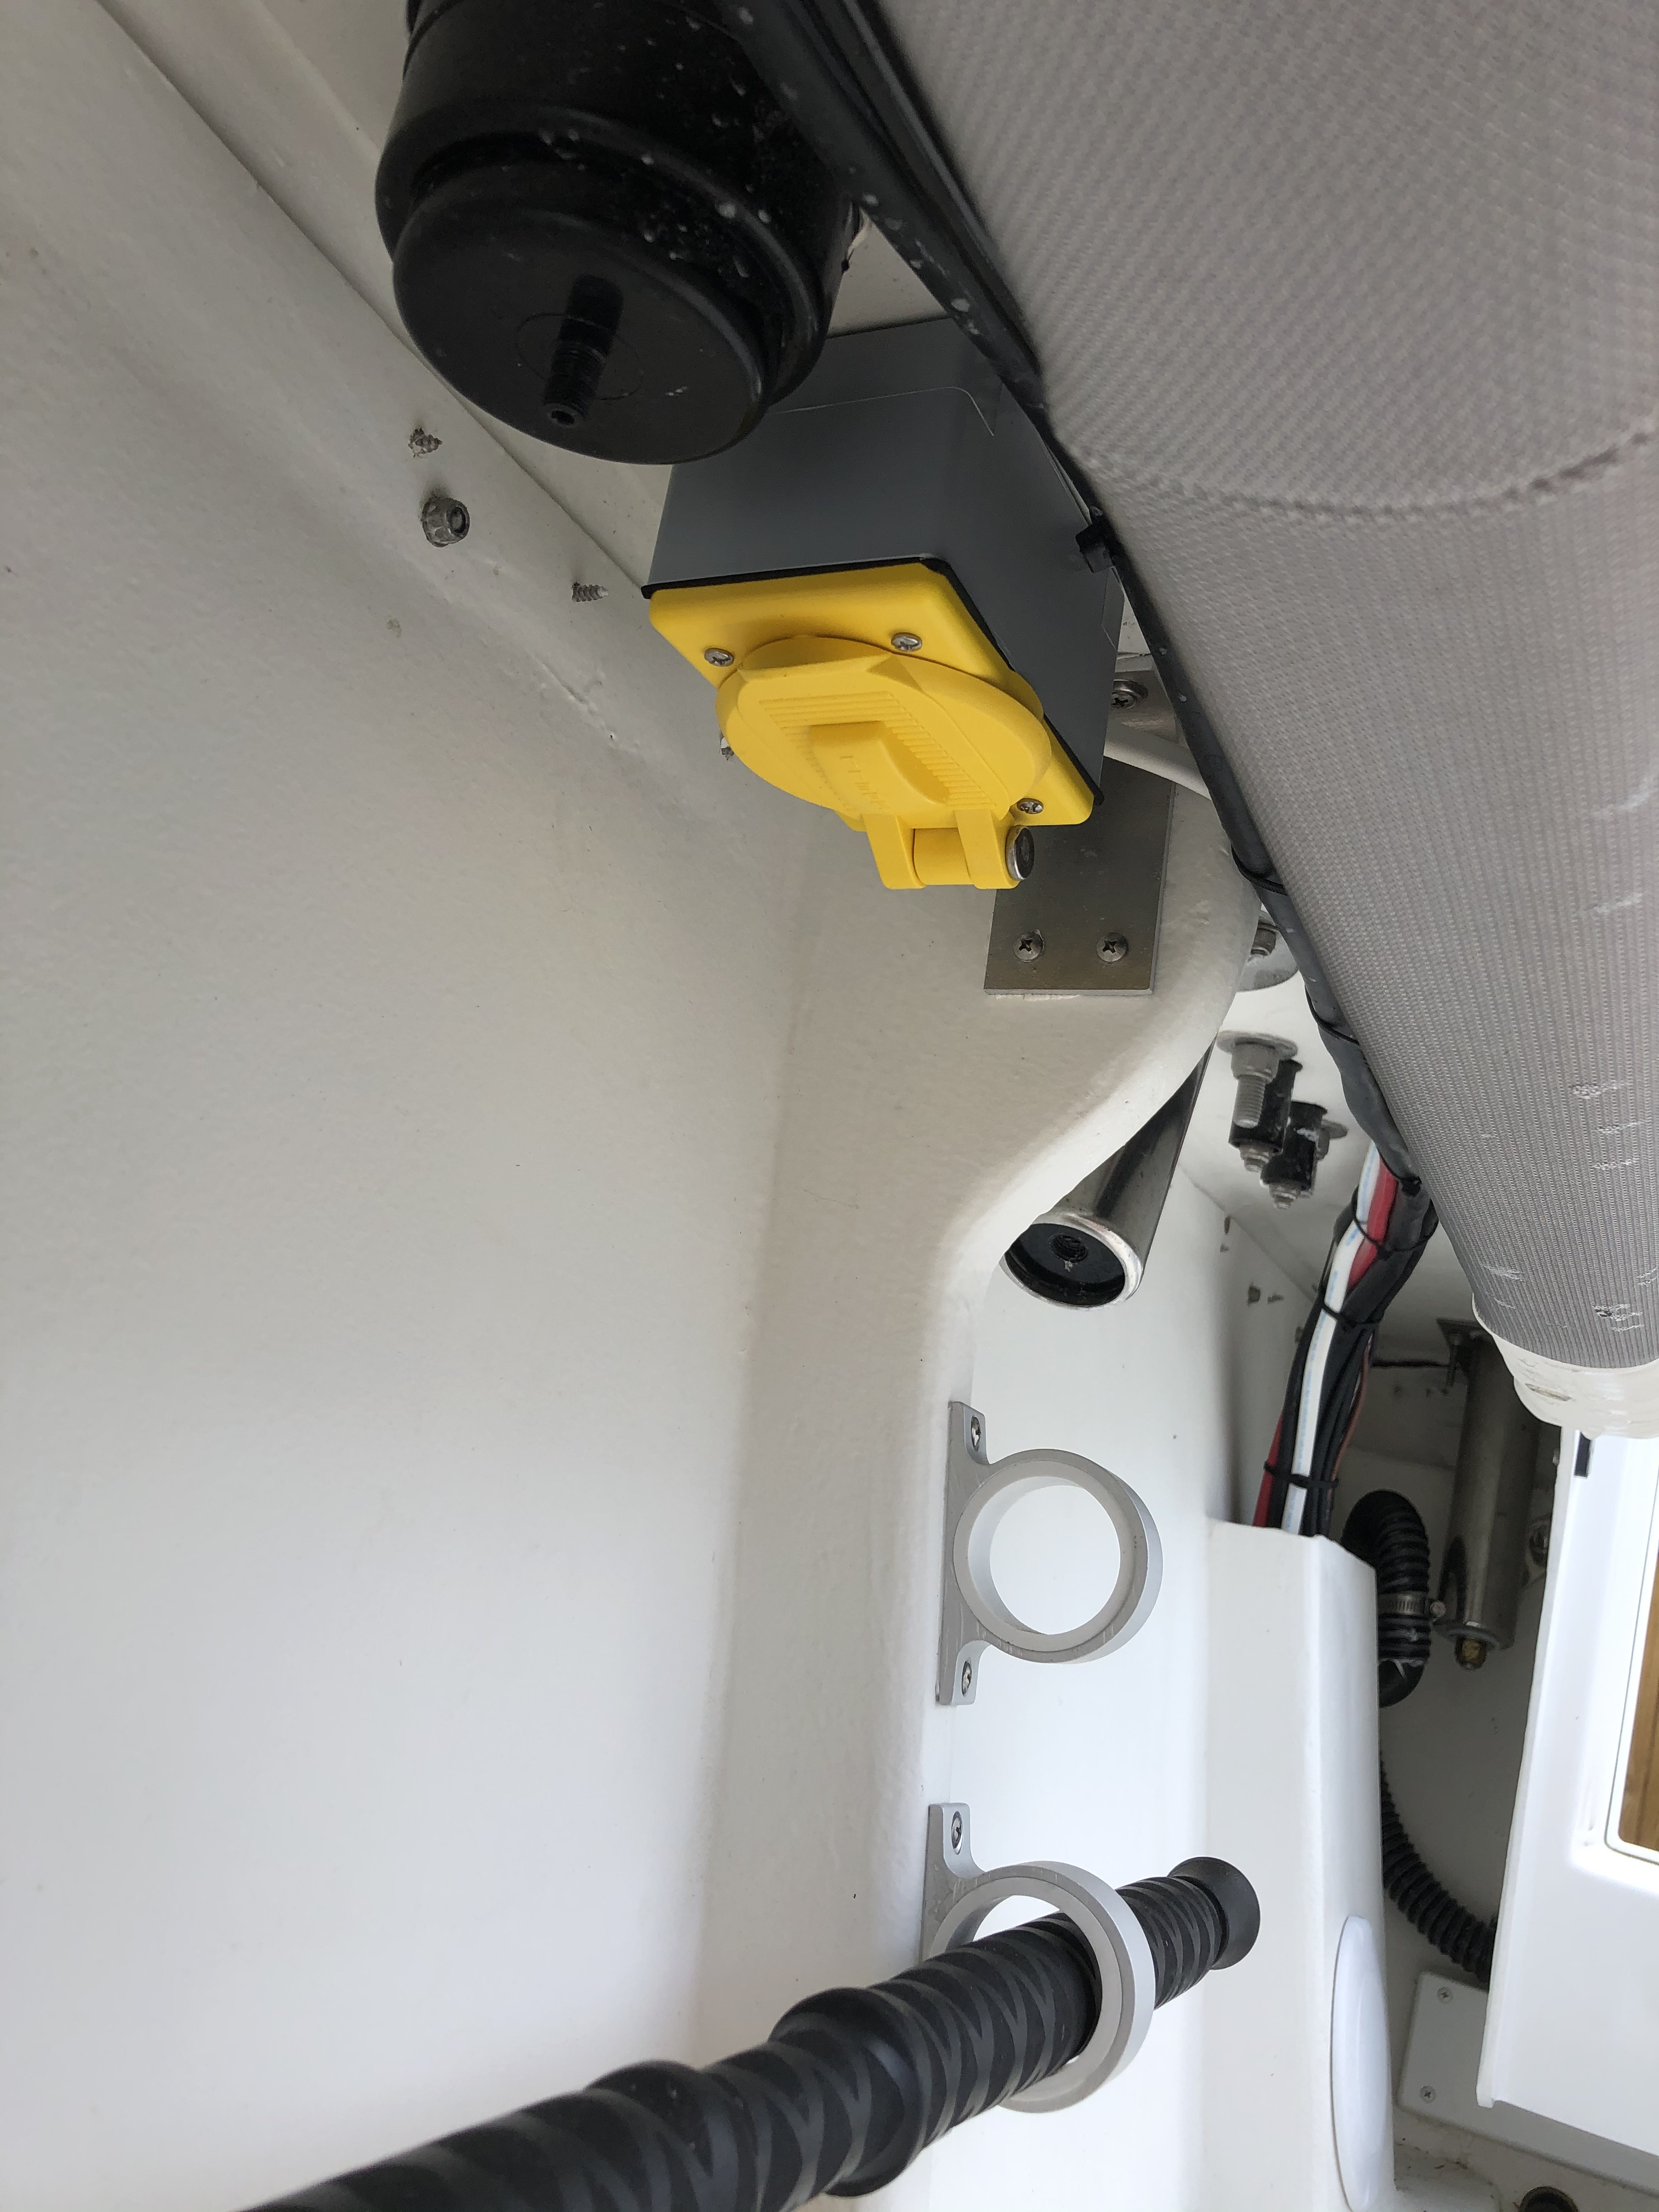 Has anyone installed electric reel outlets on a 2801cc?